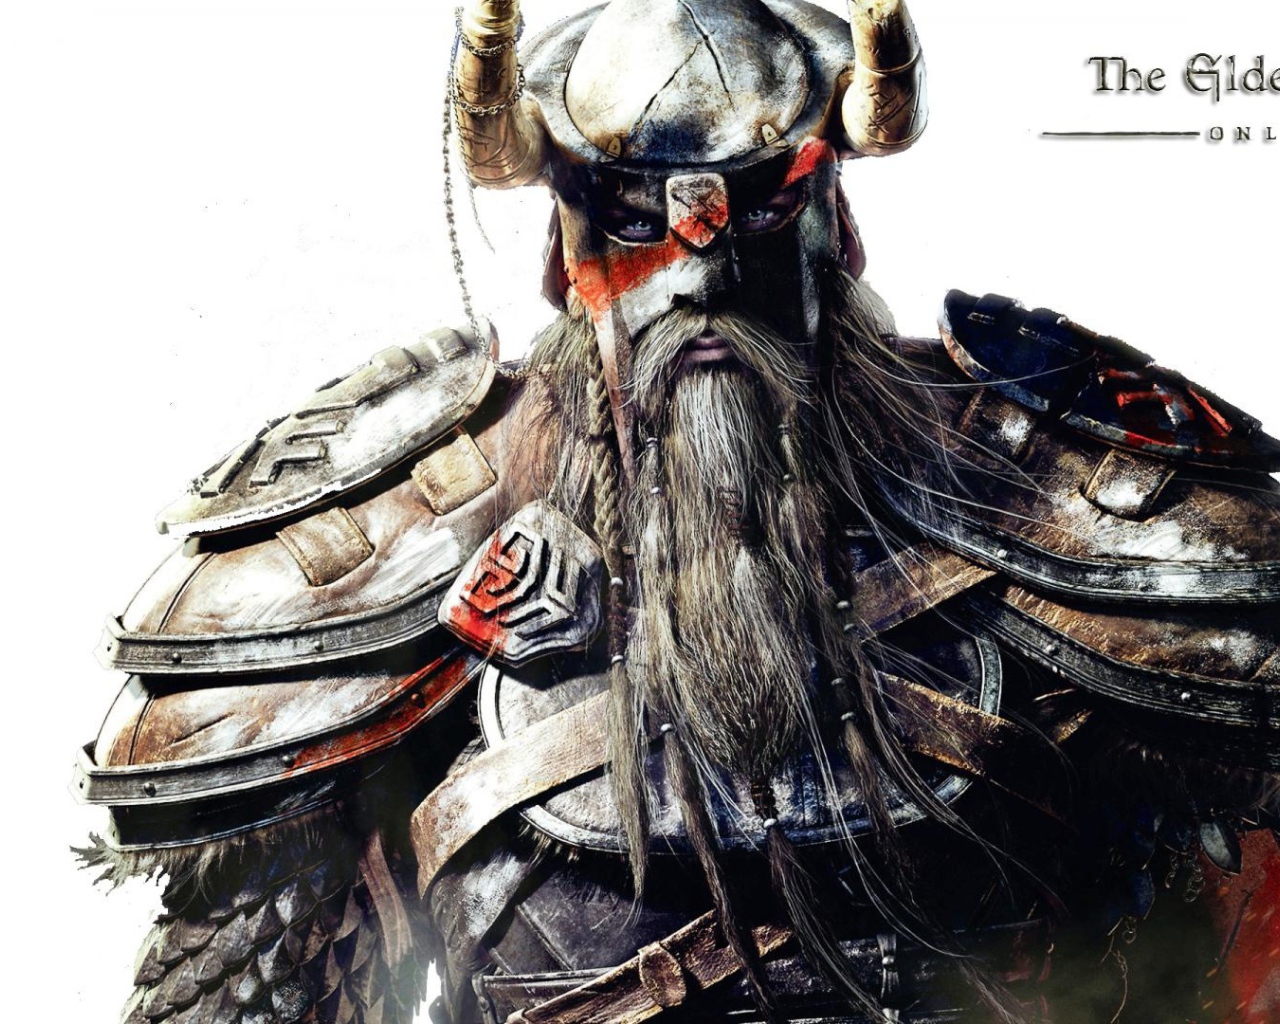 The person Viking